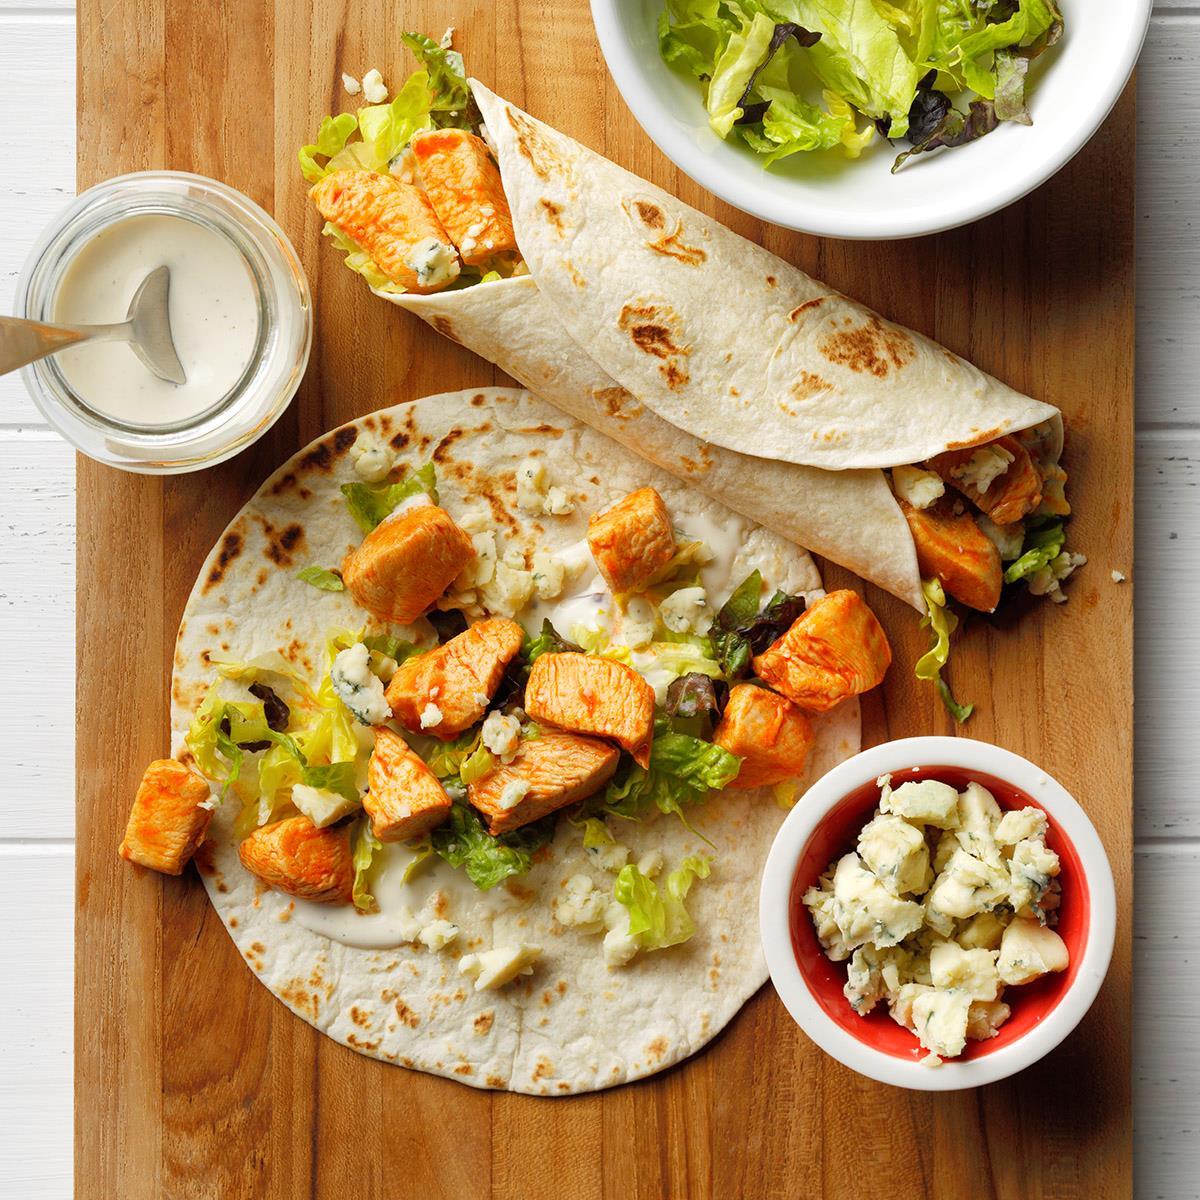 Spicy Buffalo Chicken Wraps Recipe: How to Make It